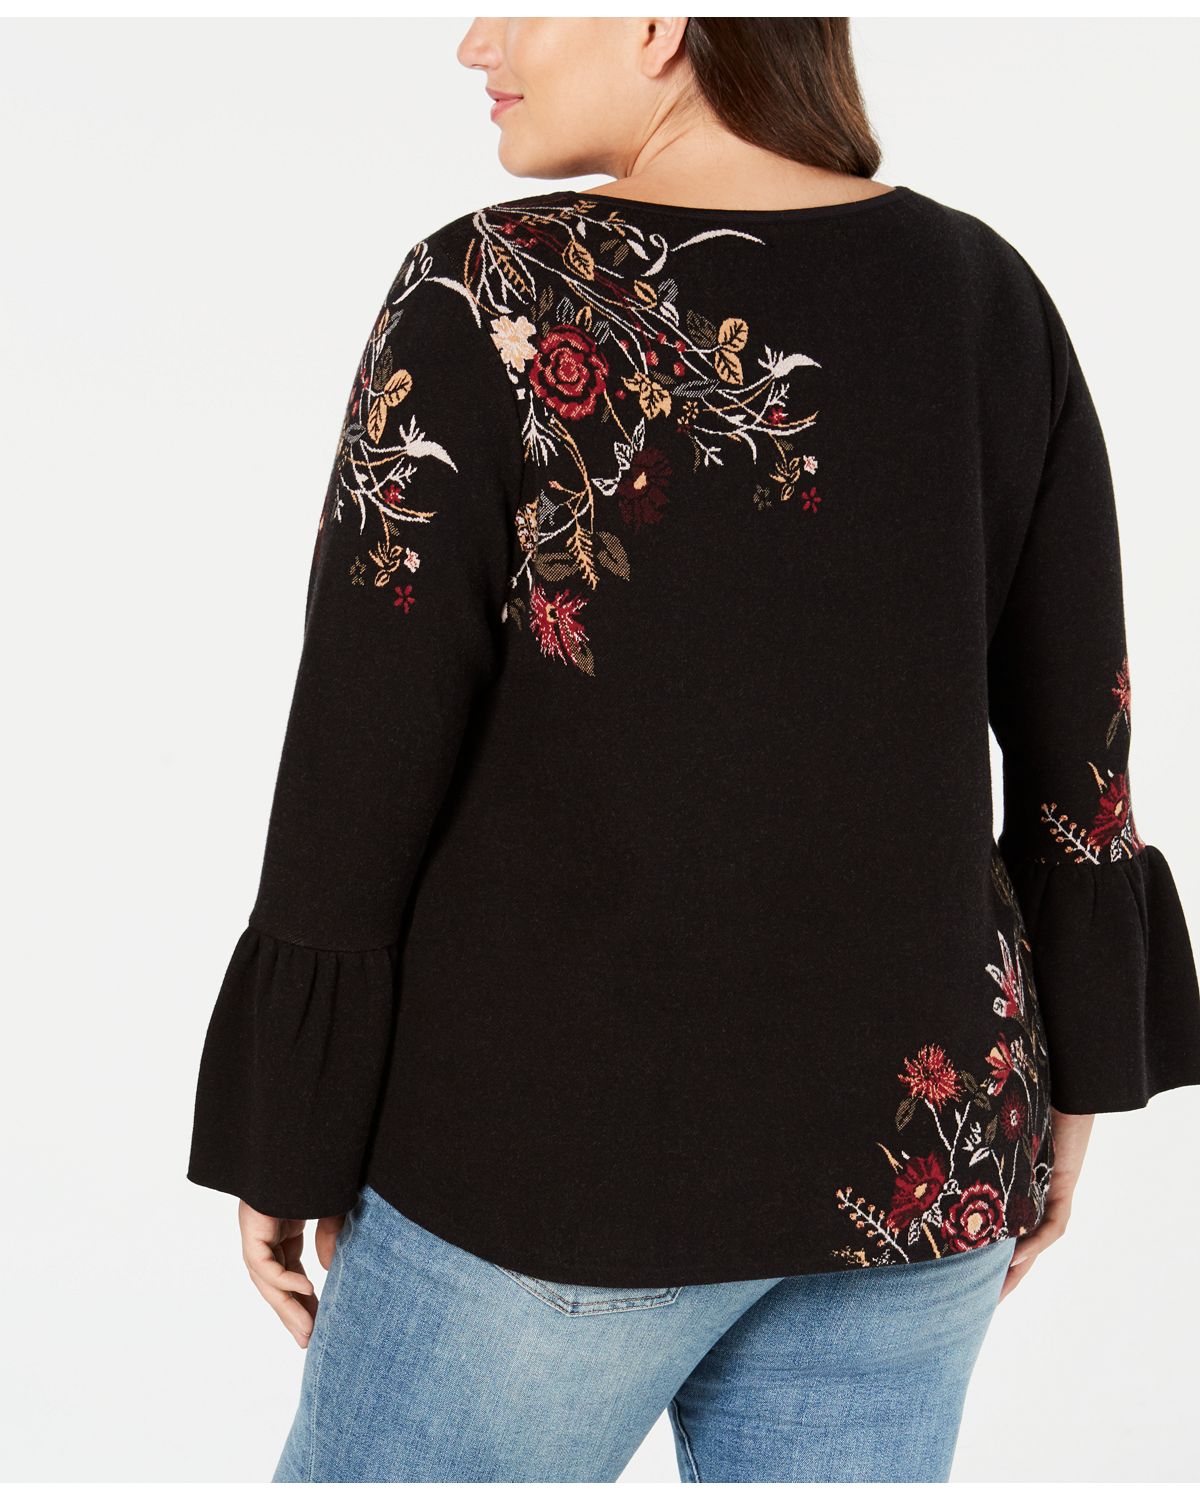 Style & Co Womens Plus Size Jacquard Bell Sleeve Sweater